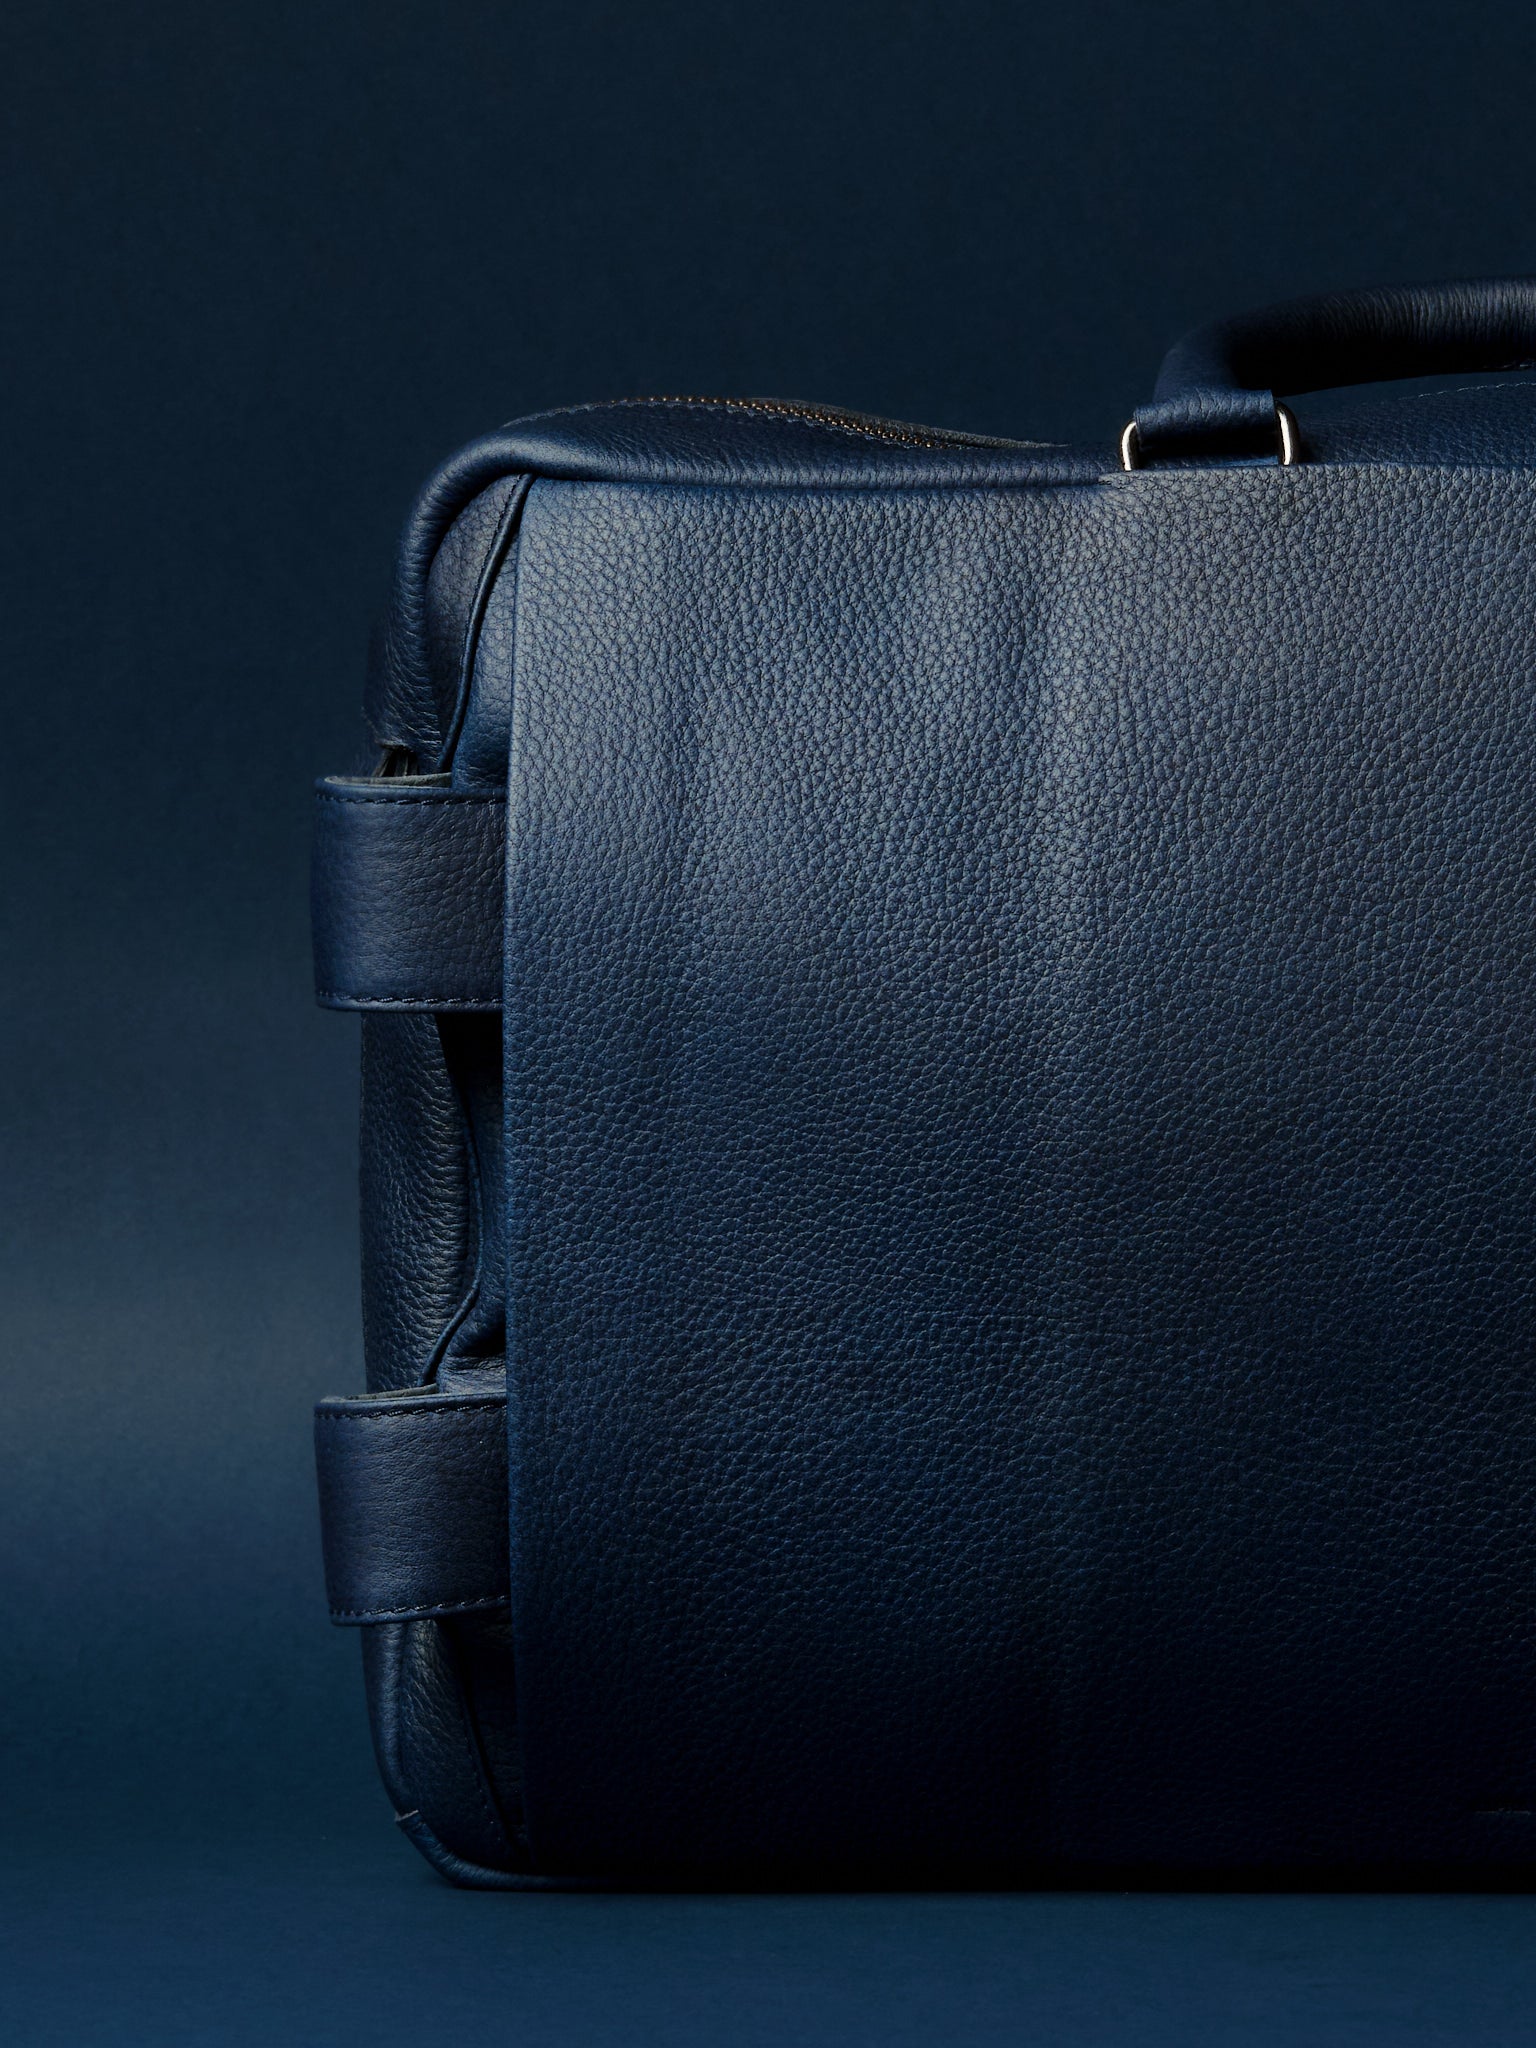 Hideaway Shoulder Straps. Tech Backpack. Backpack Briefcase Hybrid Navy by Capra Leather